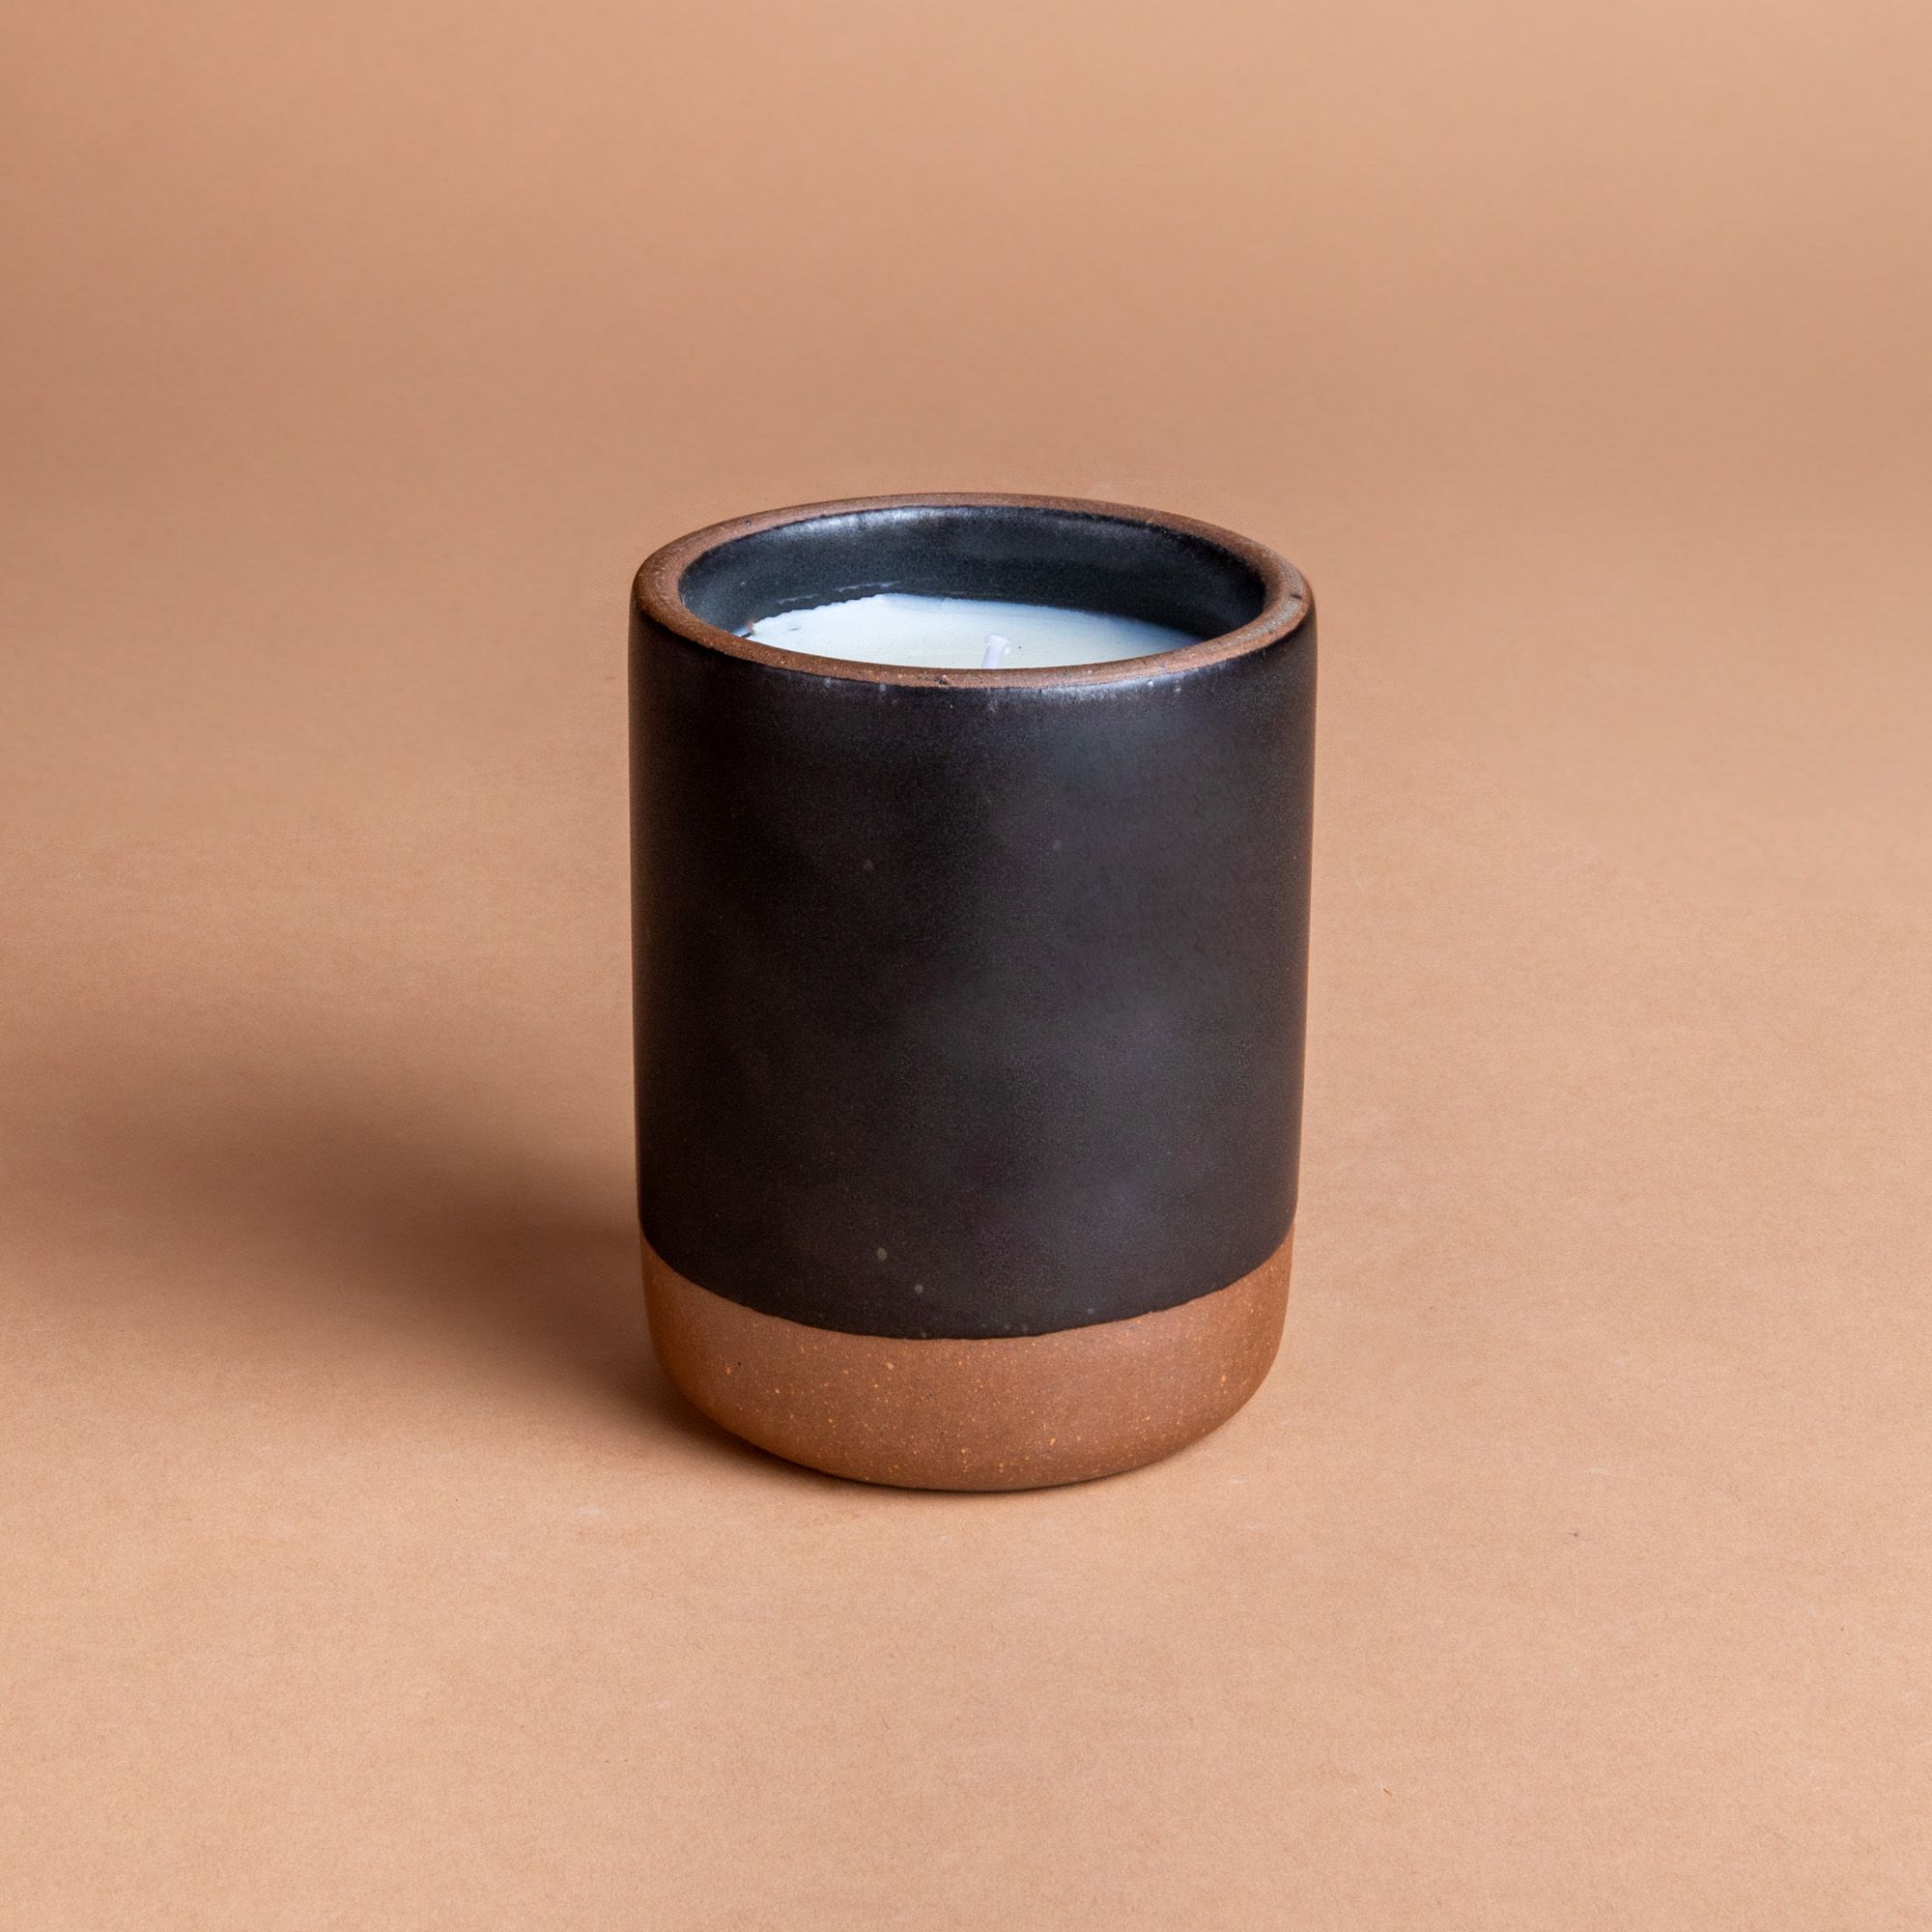 Large ceramic vessel in dark charcoal color with candle inside.